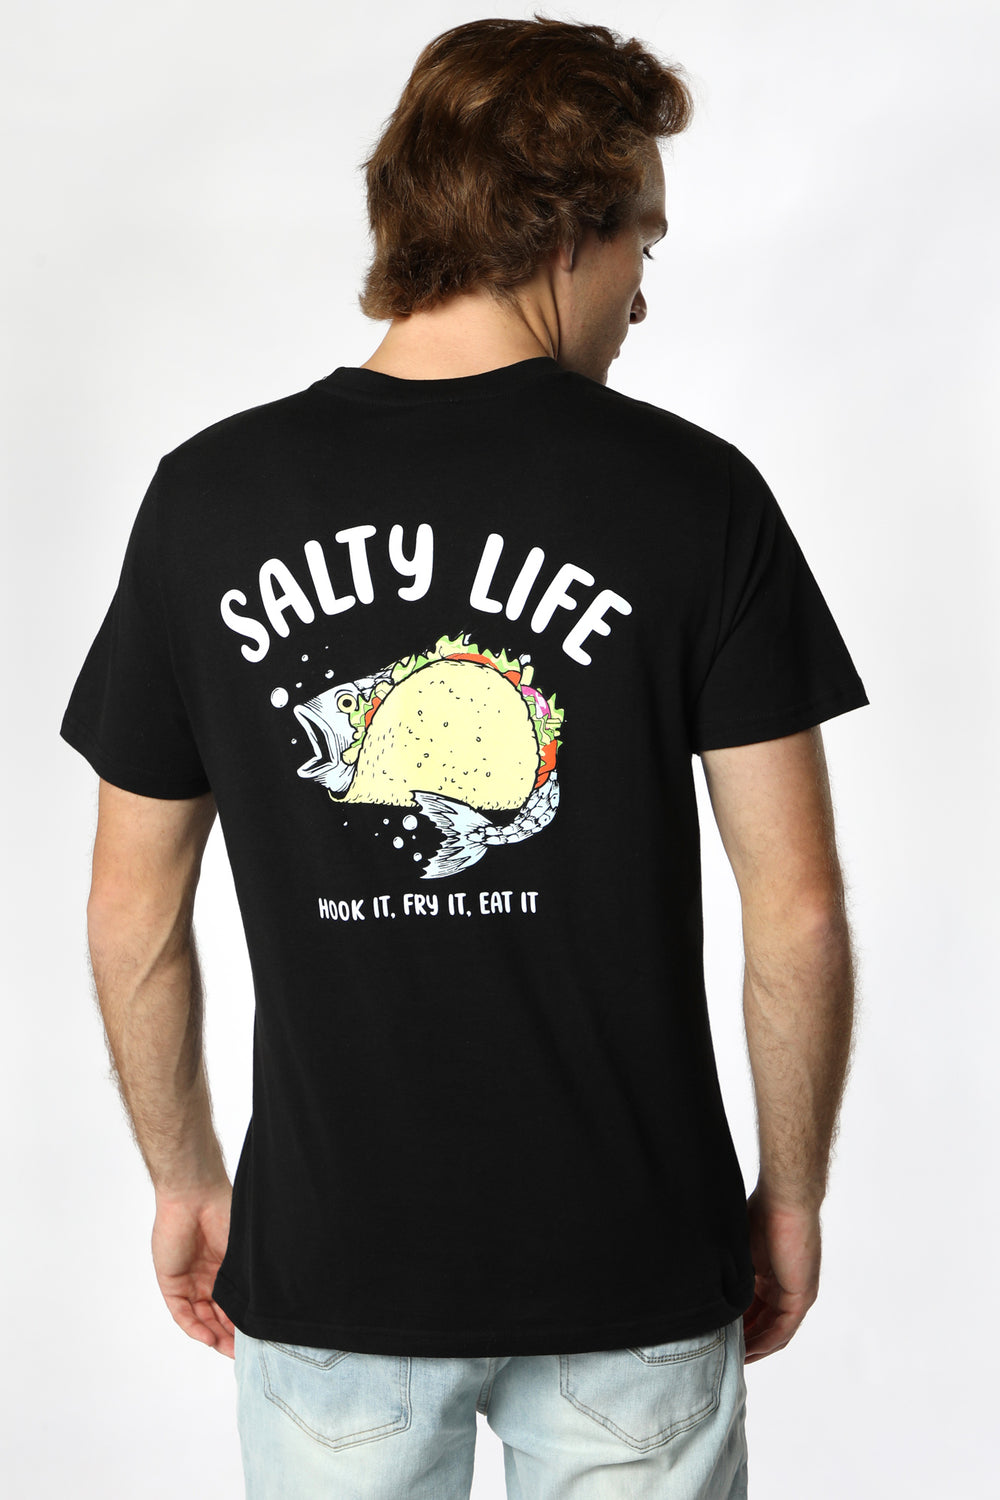 Death Valley Mens Salty Life T-Shirt Death Valley Mens Salty Life T-Shirt